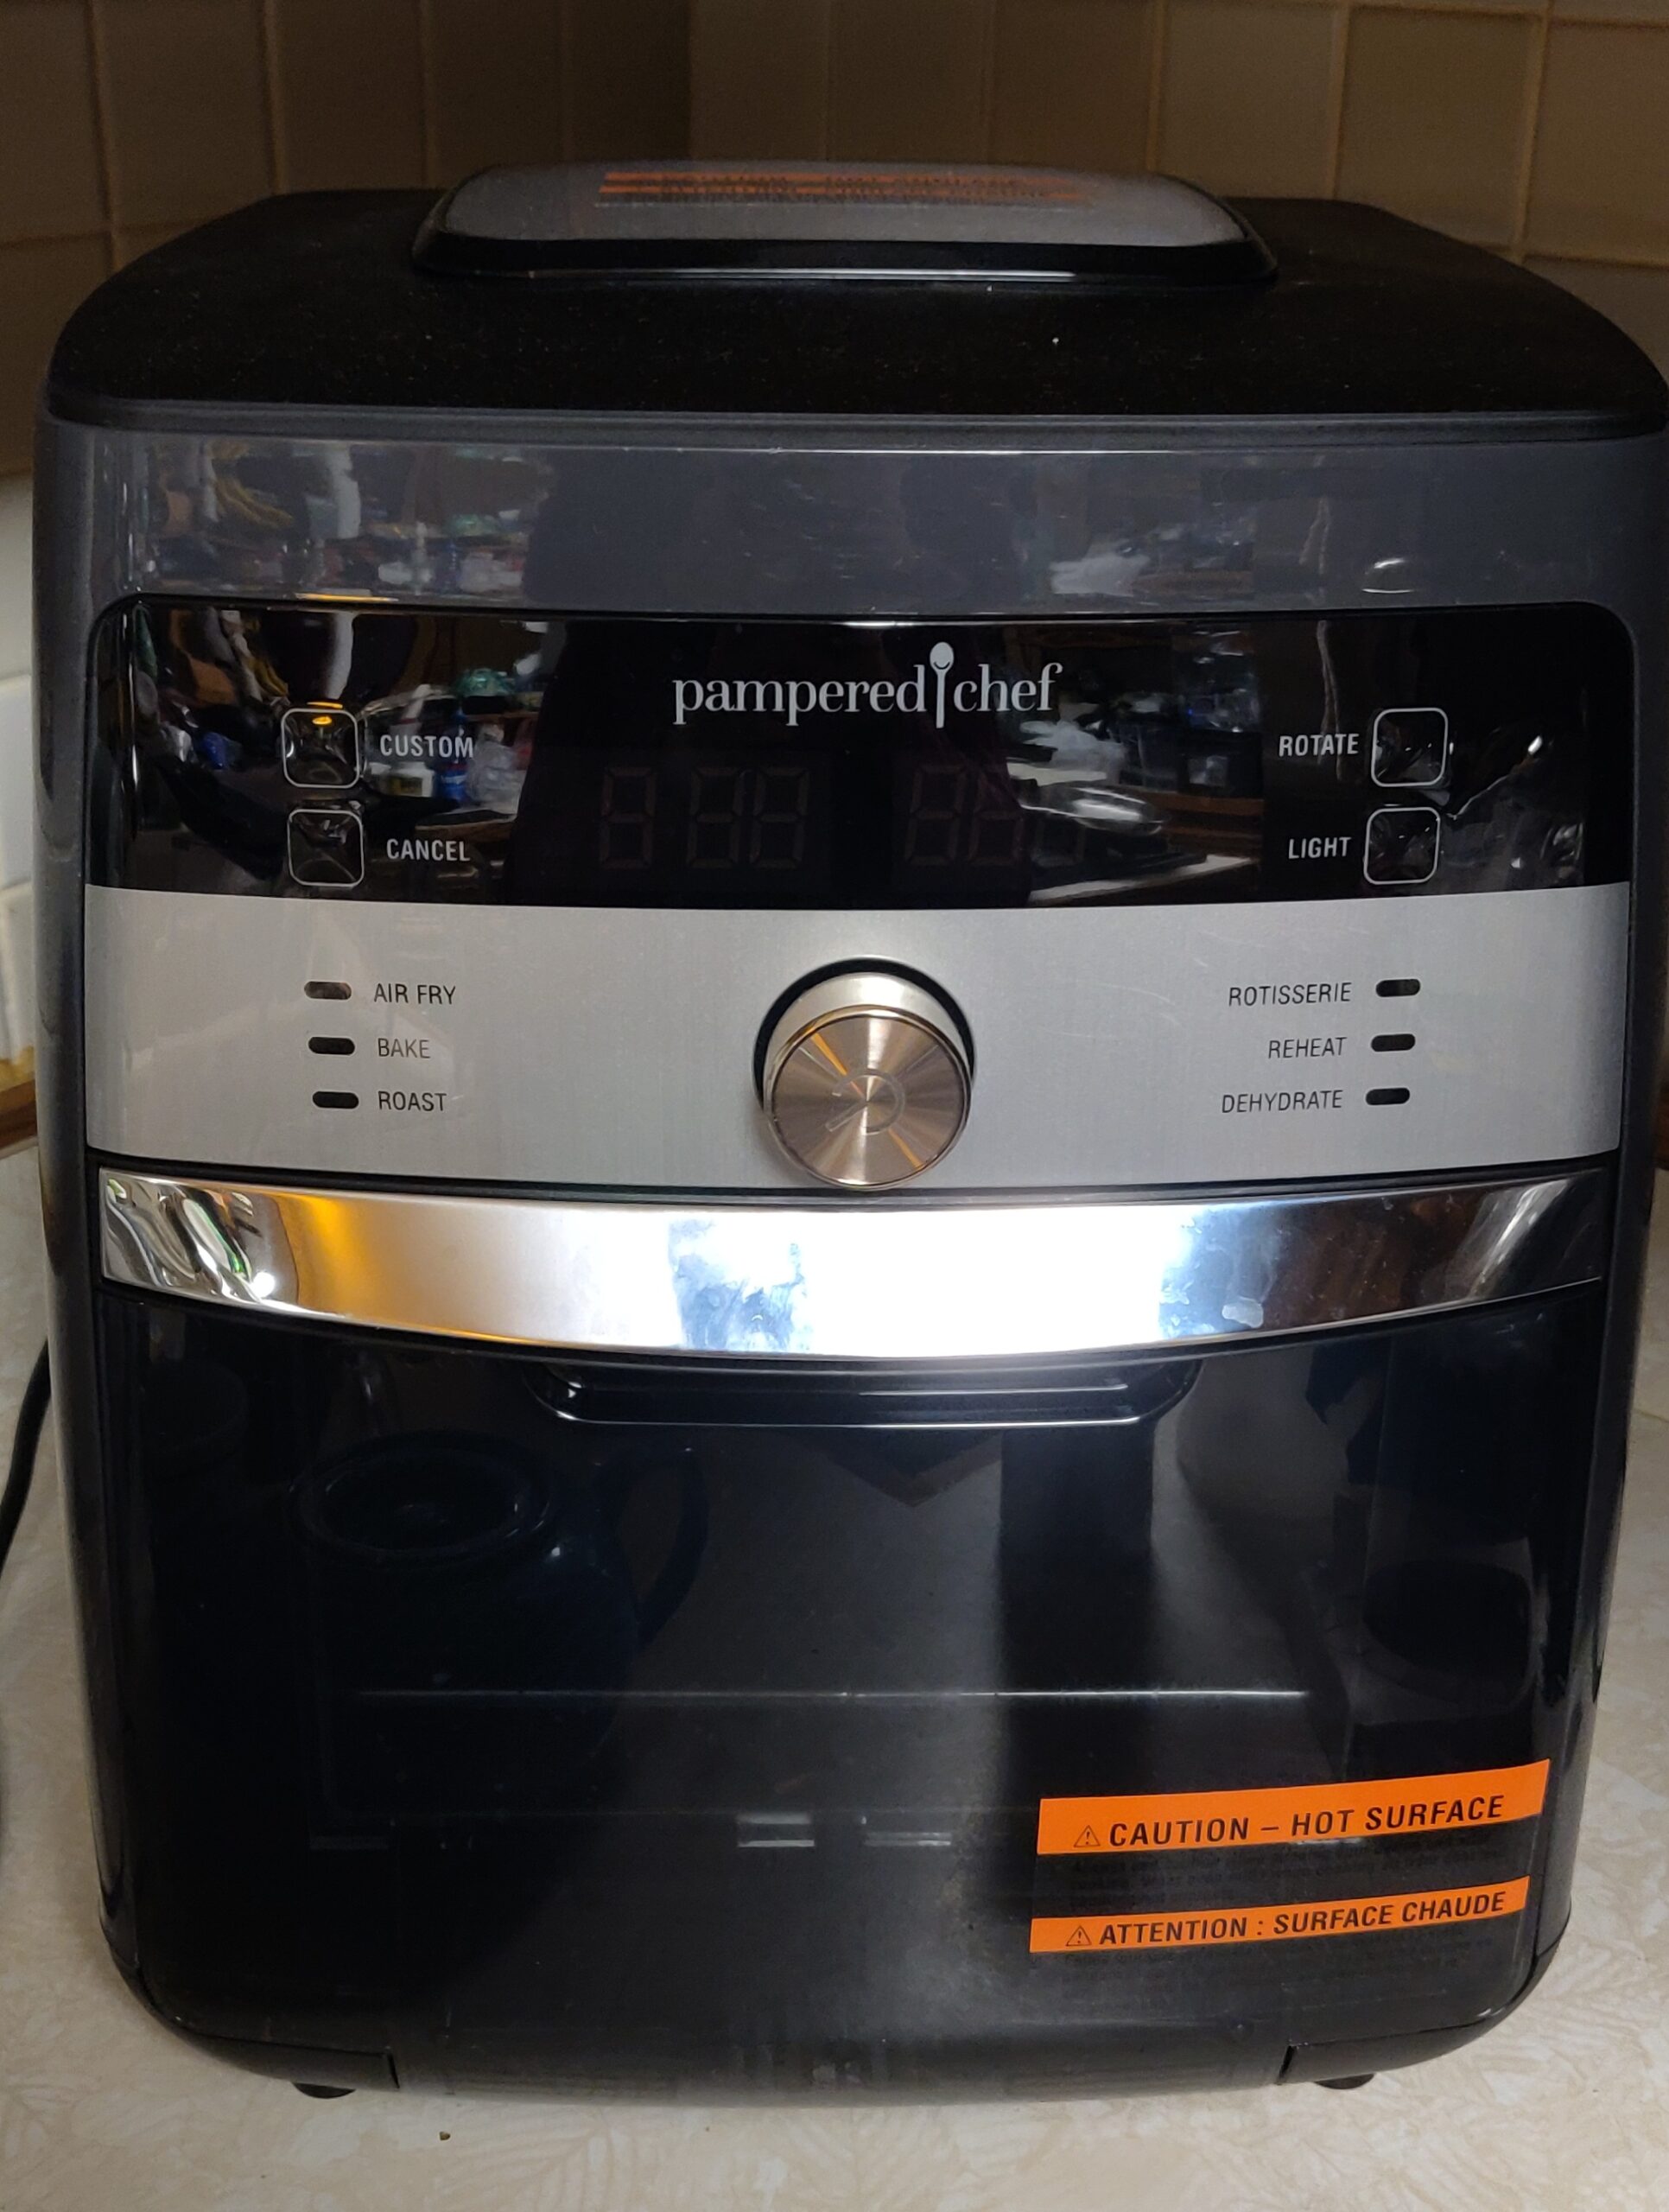 The air fryer may not look too exciting sitting on my counter, but I look forward to testing it out!  This can be used as an air fryer, rotisserie, dehydrator, and more!